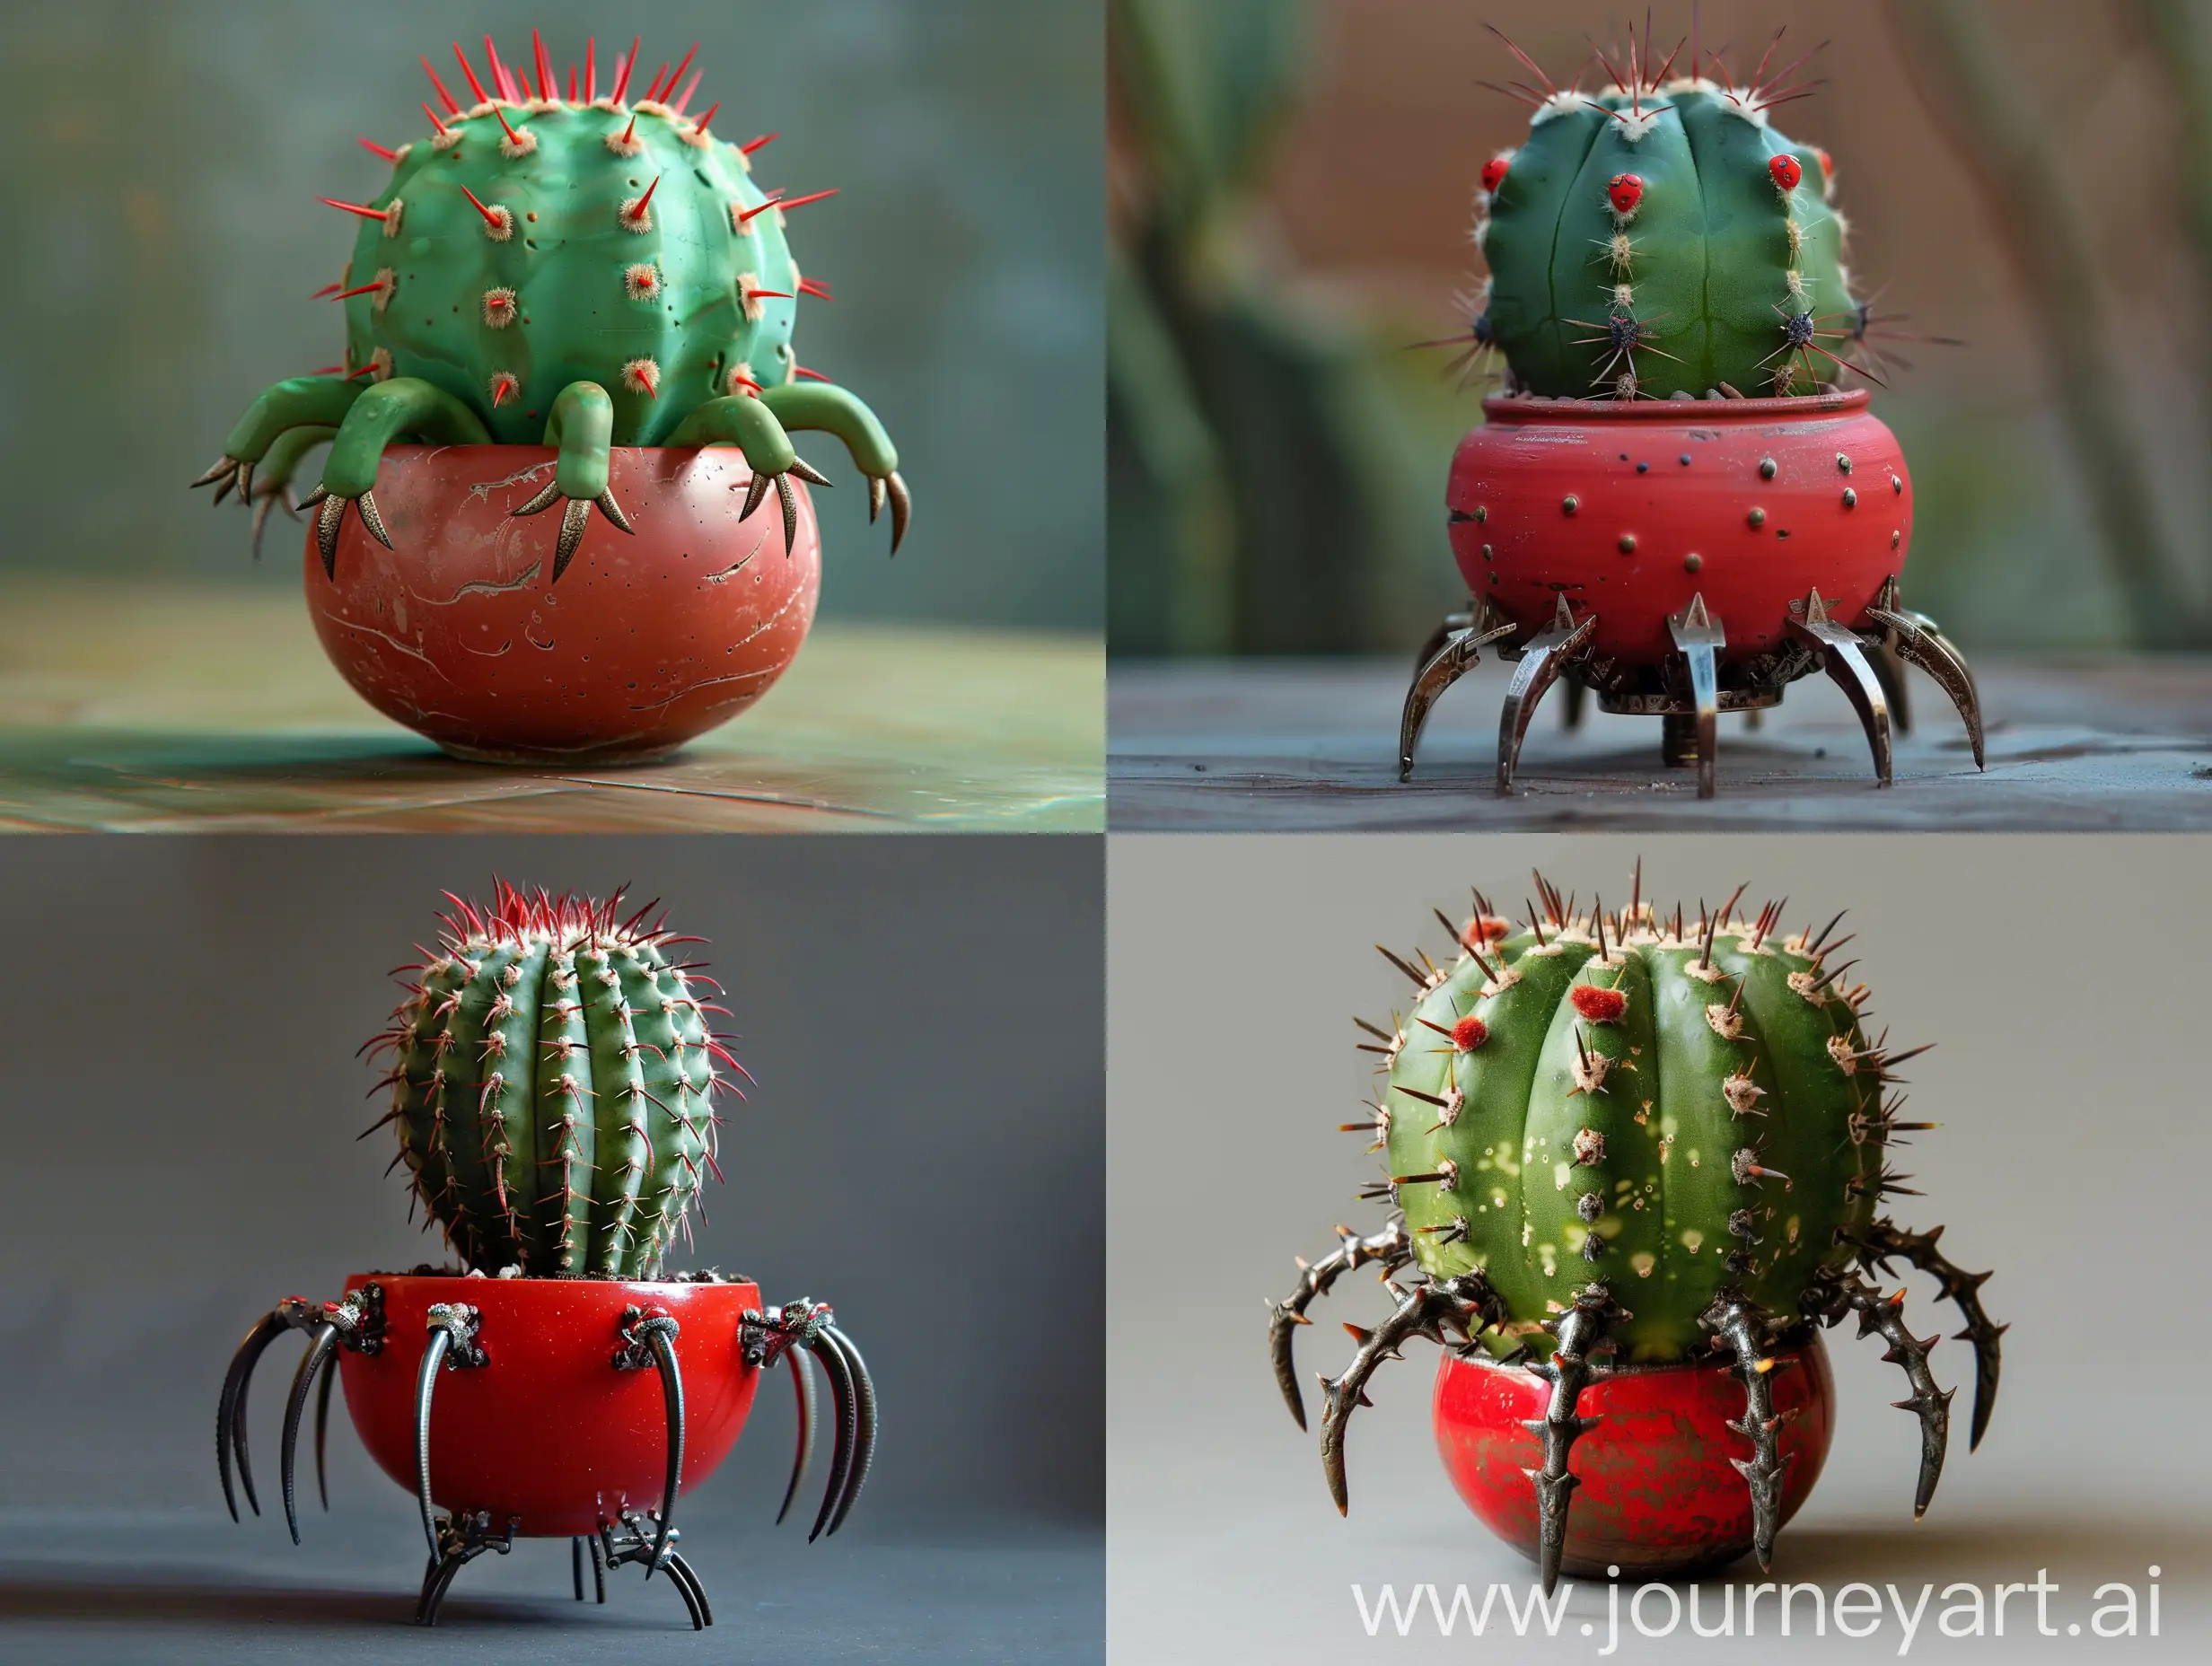 PistachioColored-Aloe-Vera-Cactus-with-Red-LipShaped-Moles-and-SpiderLegged-Pot-Ring